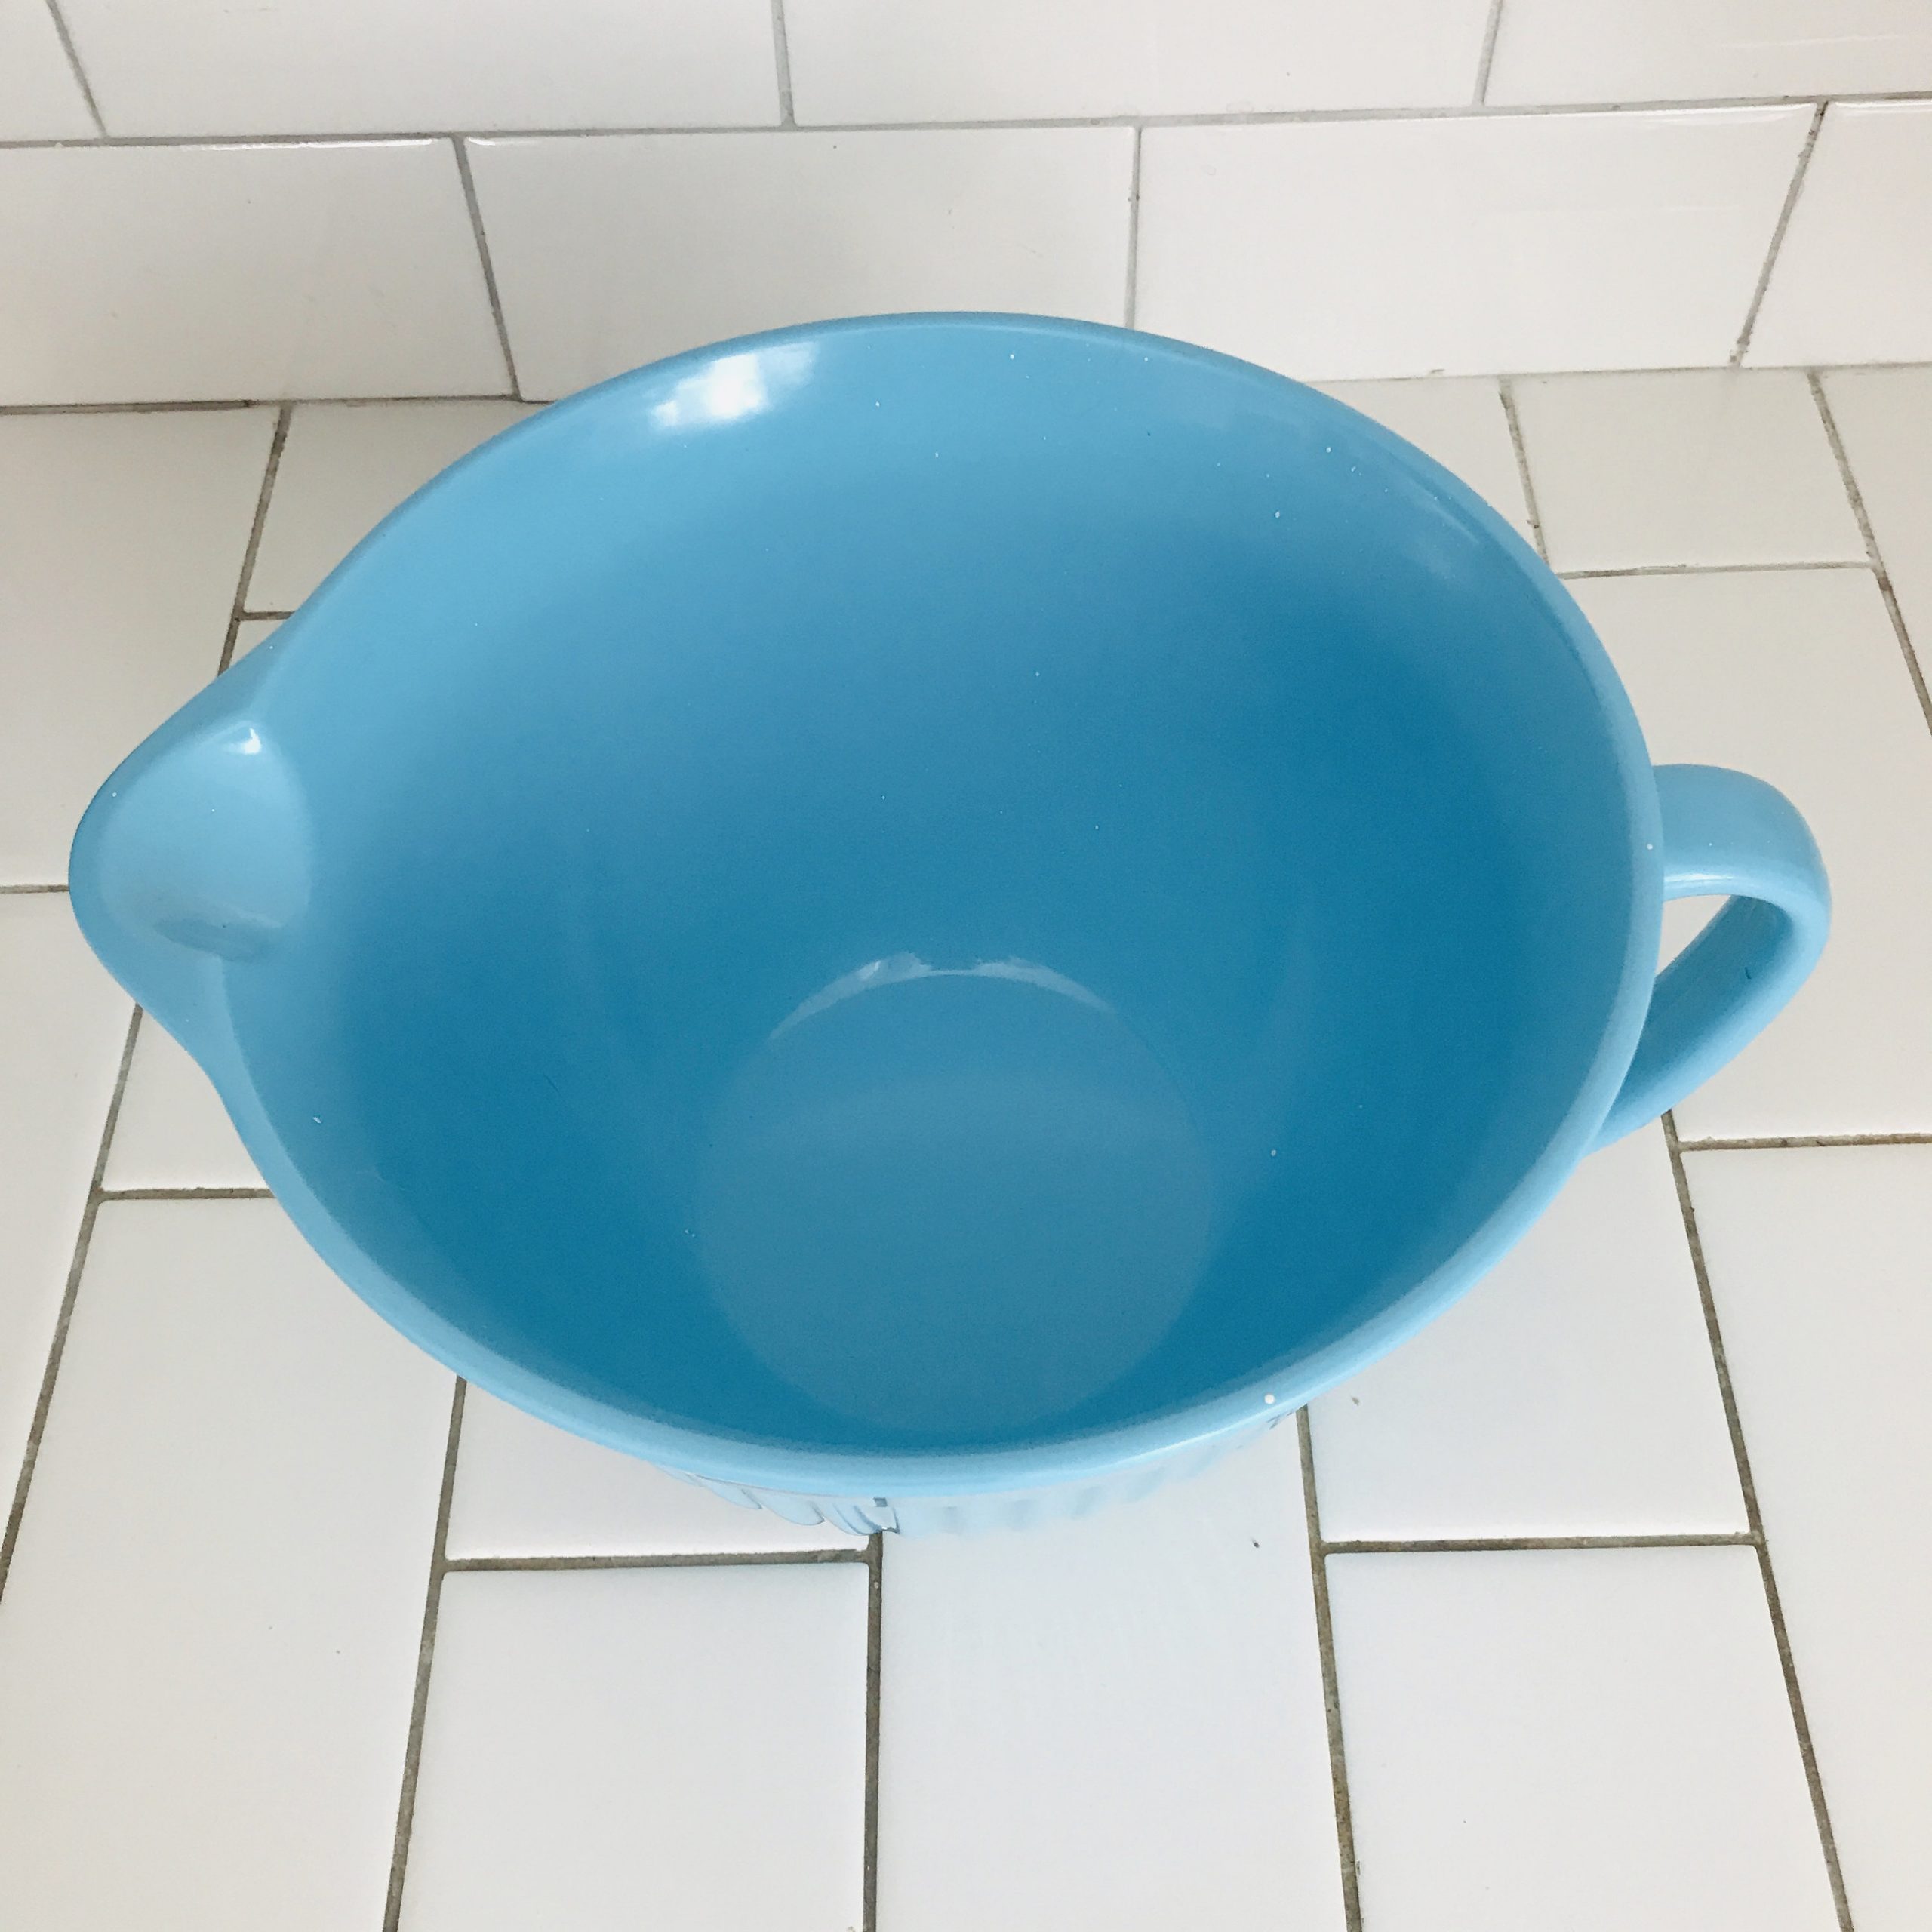 https://www.truevintageantiques.com/wp-content/uploads/2020/07/vintage-melamine-bowl-with-pour-spout-mixing-bowl-collectible-display-kitchen-decor-non-slip-base-ribbed-with-handle-5f1cb6e54-scaled.jpg